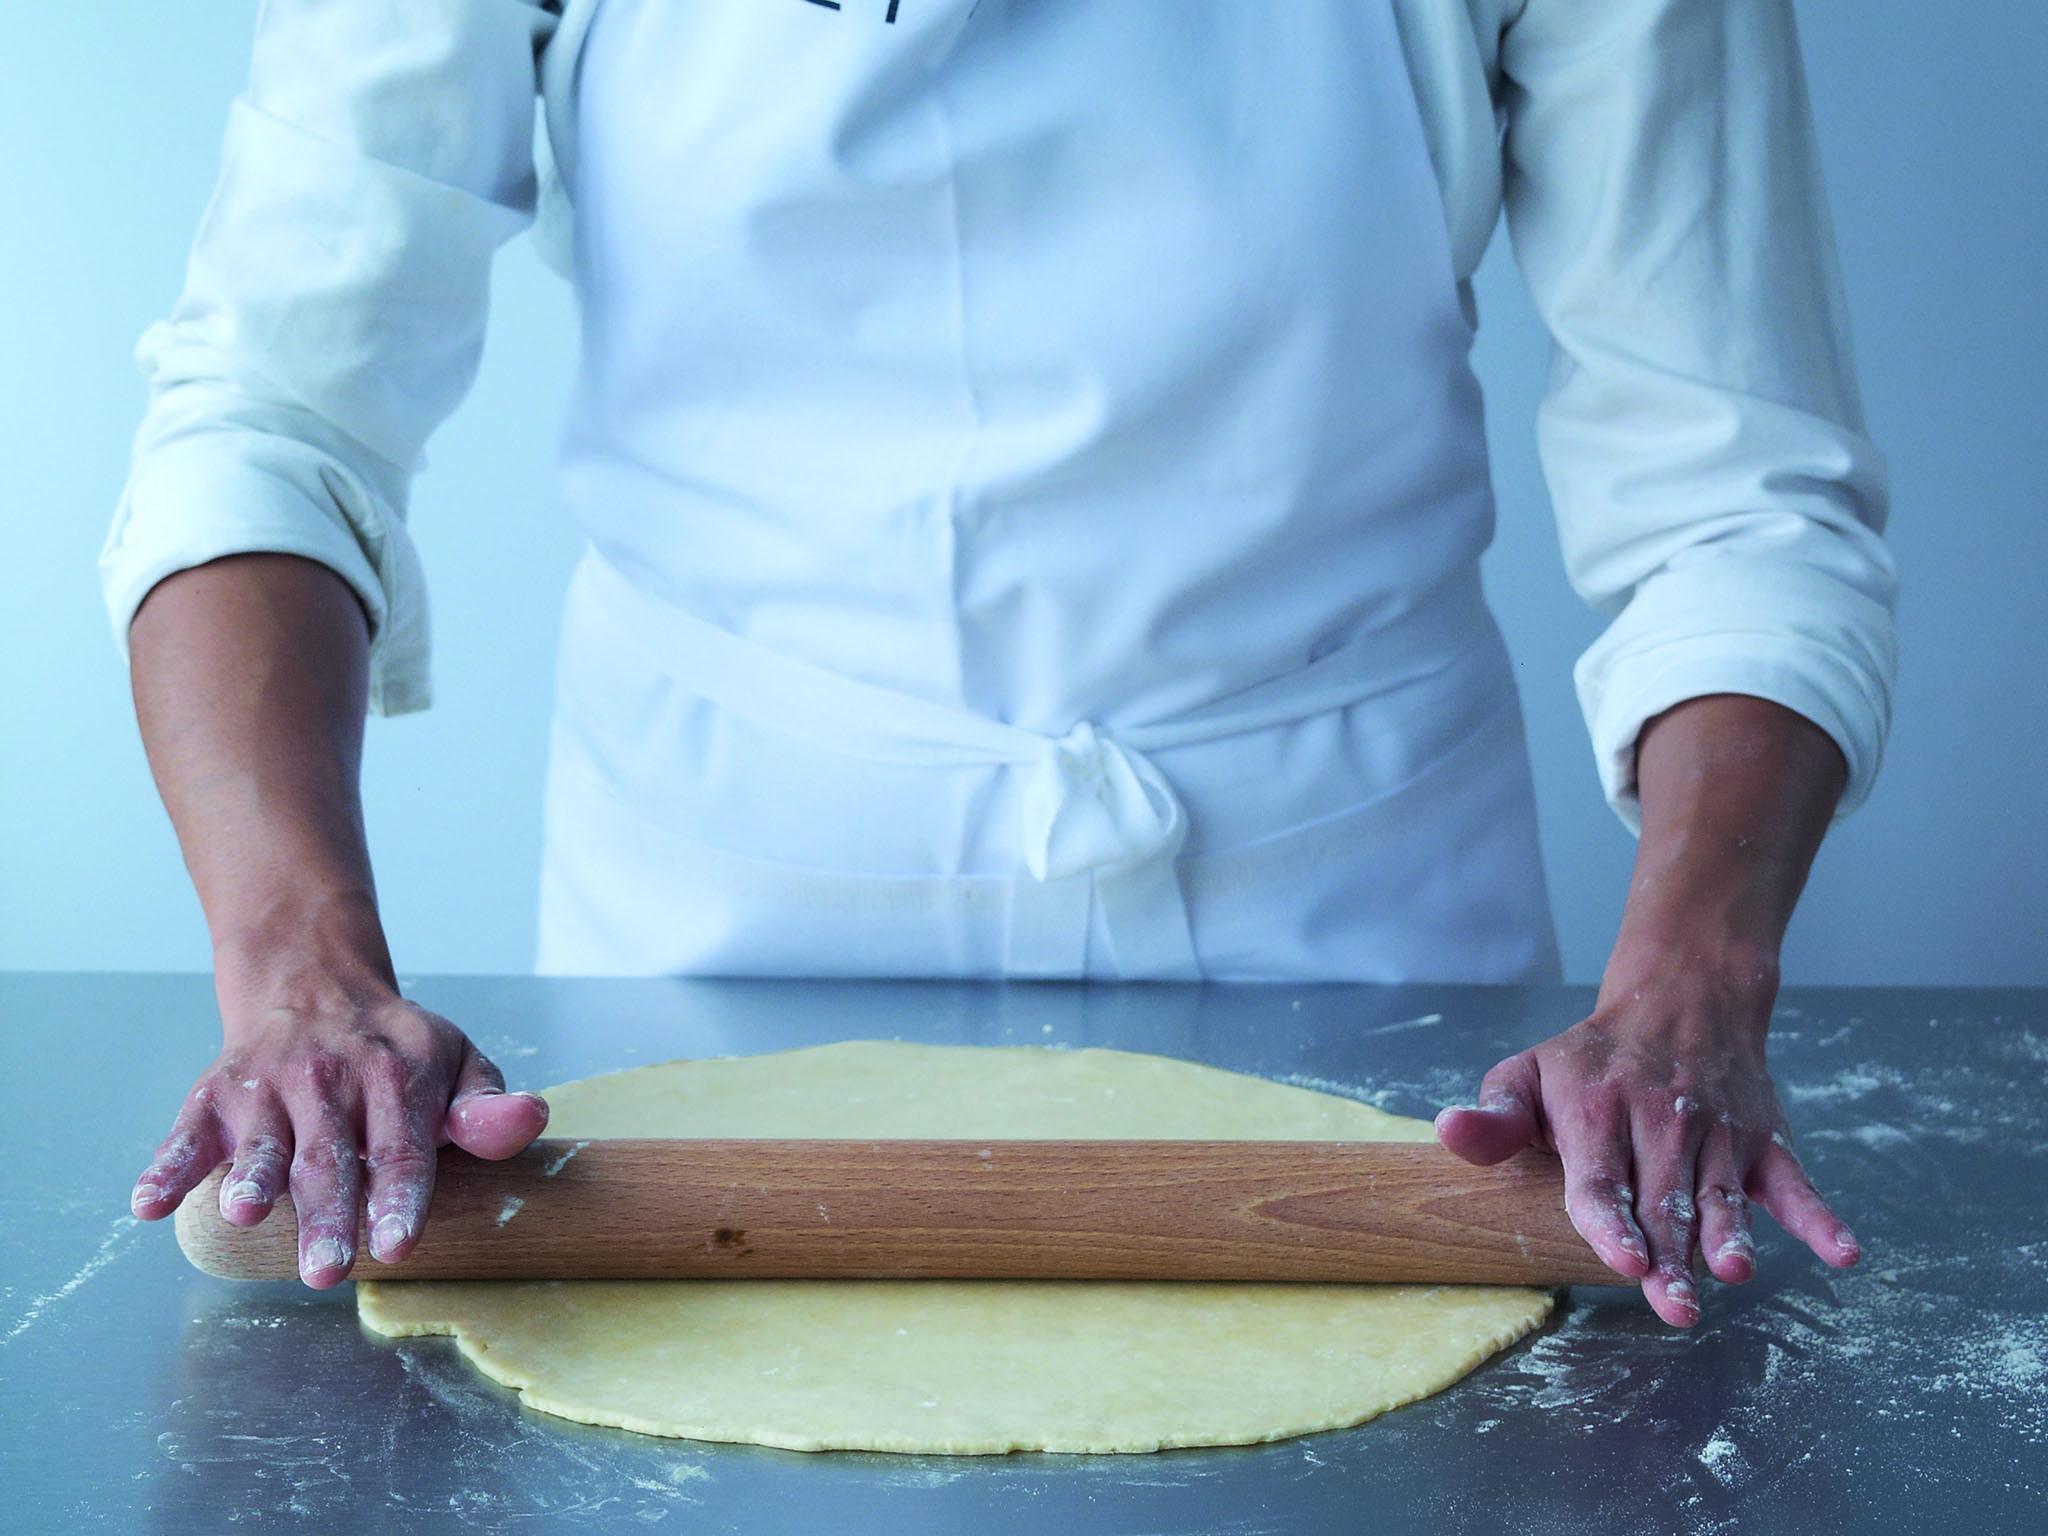 3. Once the pastry is rolled to the required thickness (usually about 3mm), it should be an even thickness and circular in shape with no excessive cracking at the edges